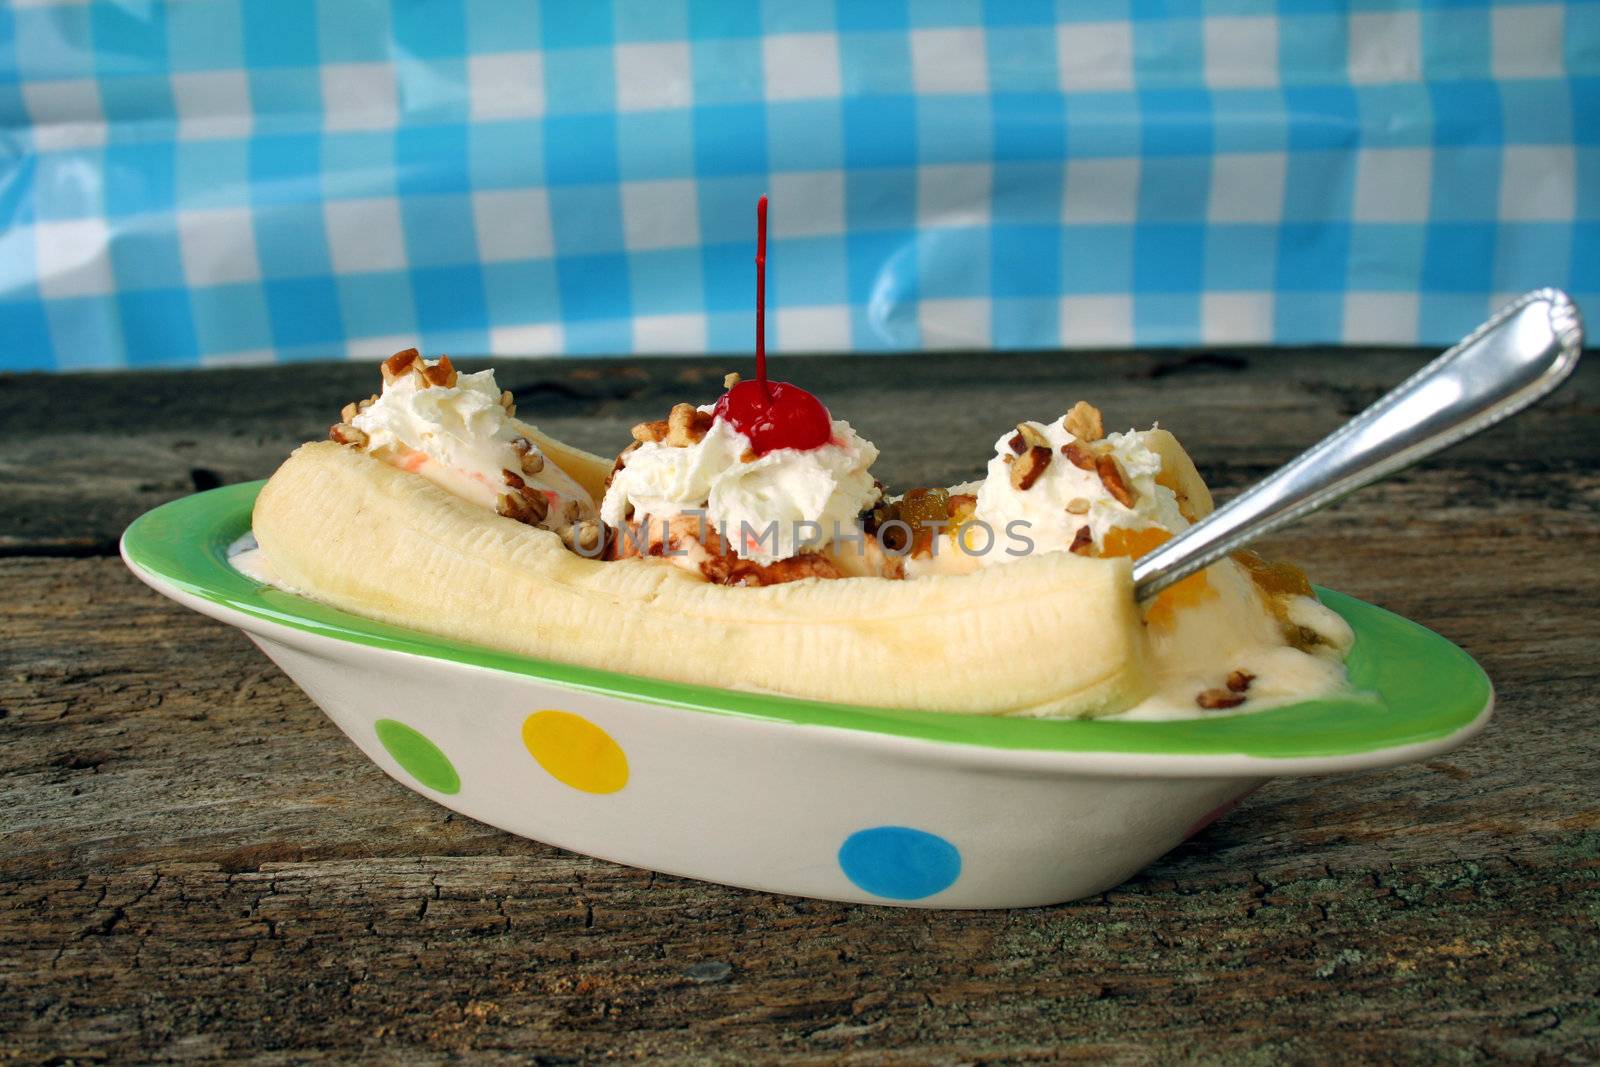 Banana split with all the fixings.